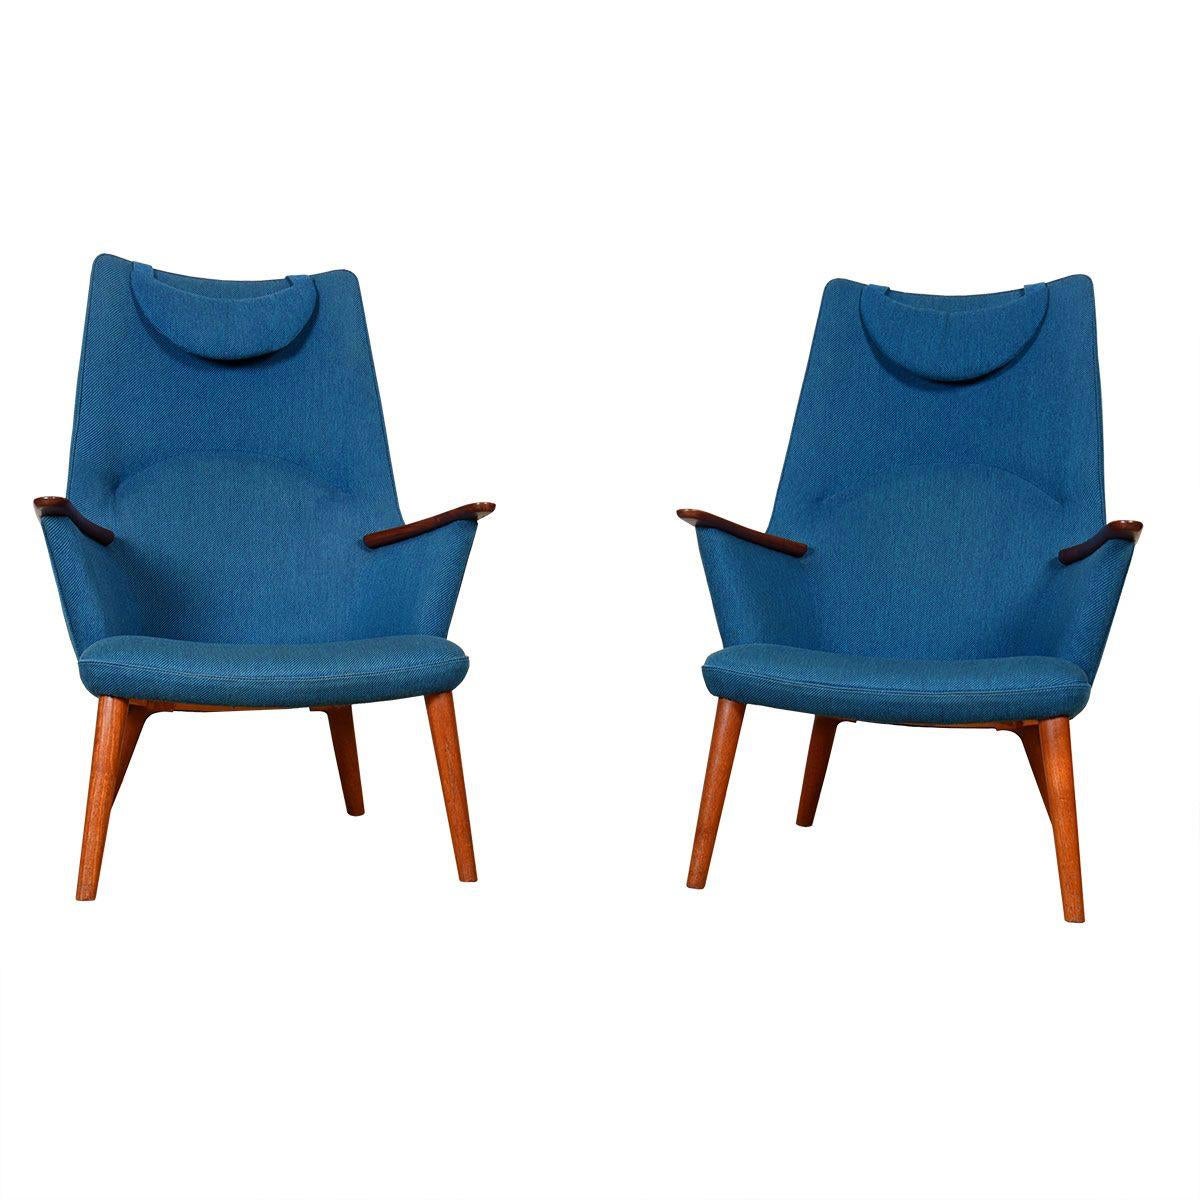 Mid-Century Modern Pair of Hans Wegner “Mama Bear” AP-27 Easy Lounge Chairs for A. P. Stolen